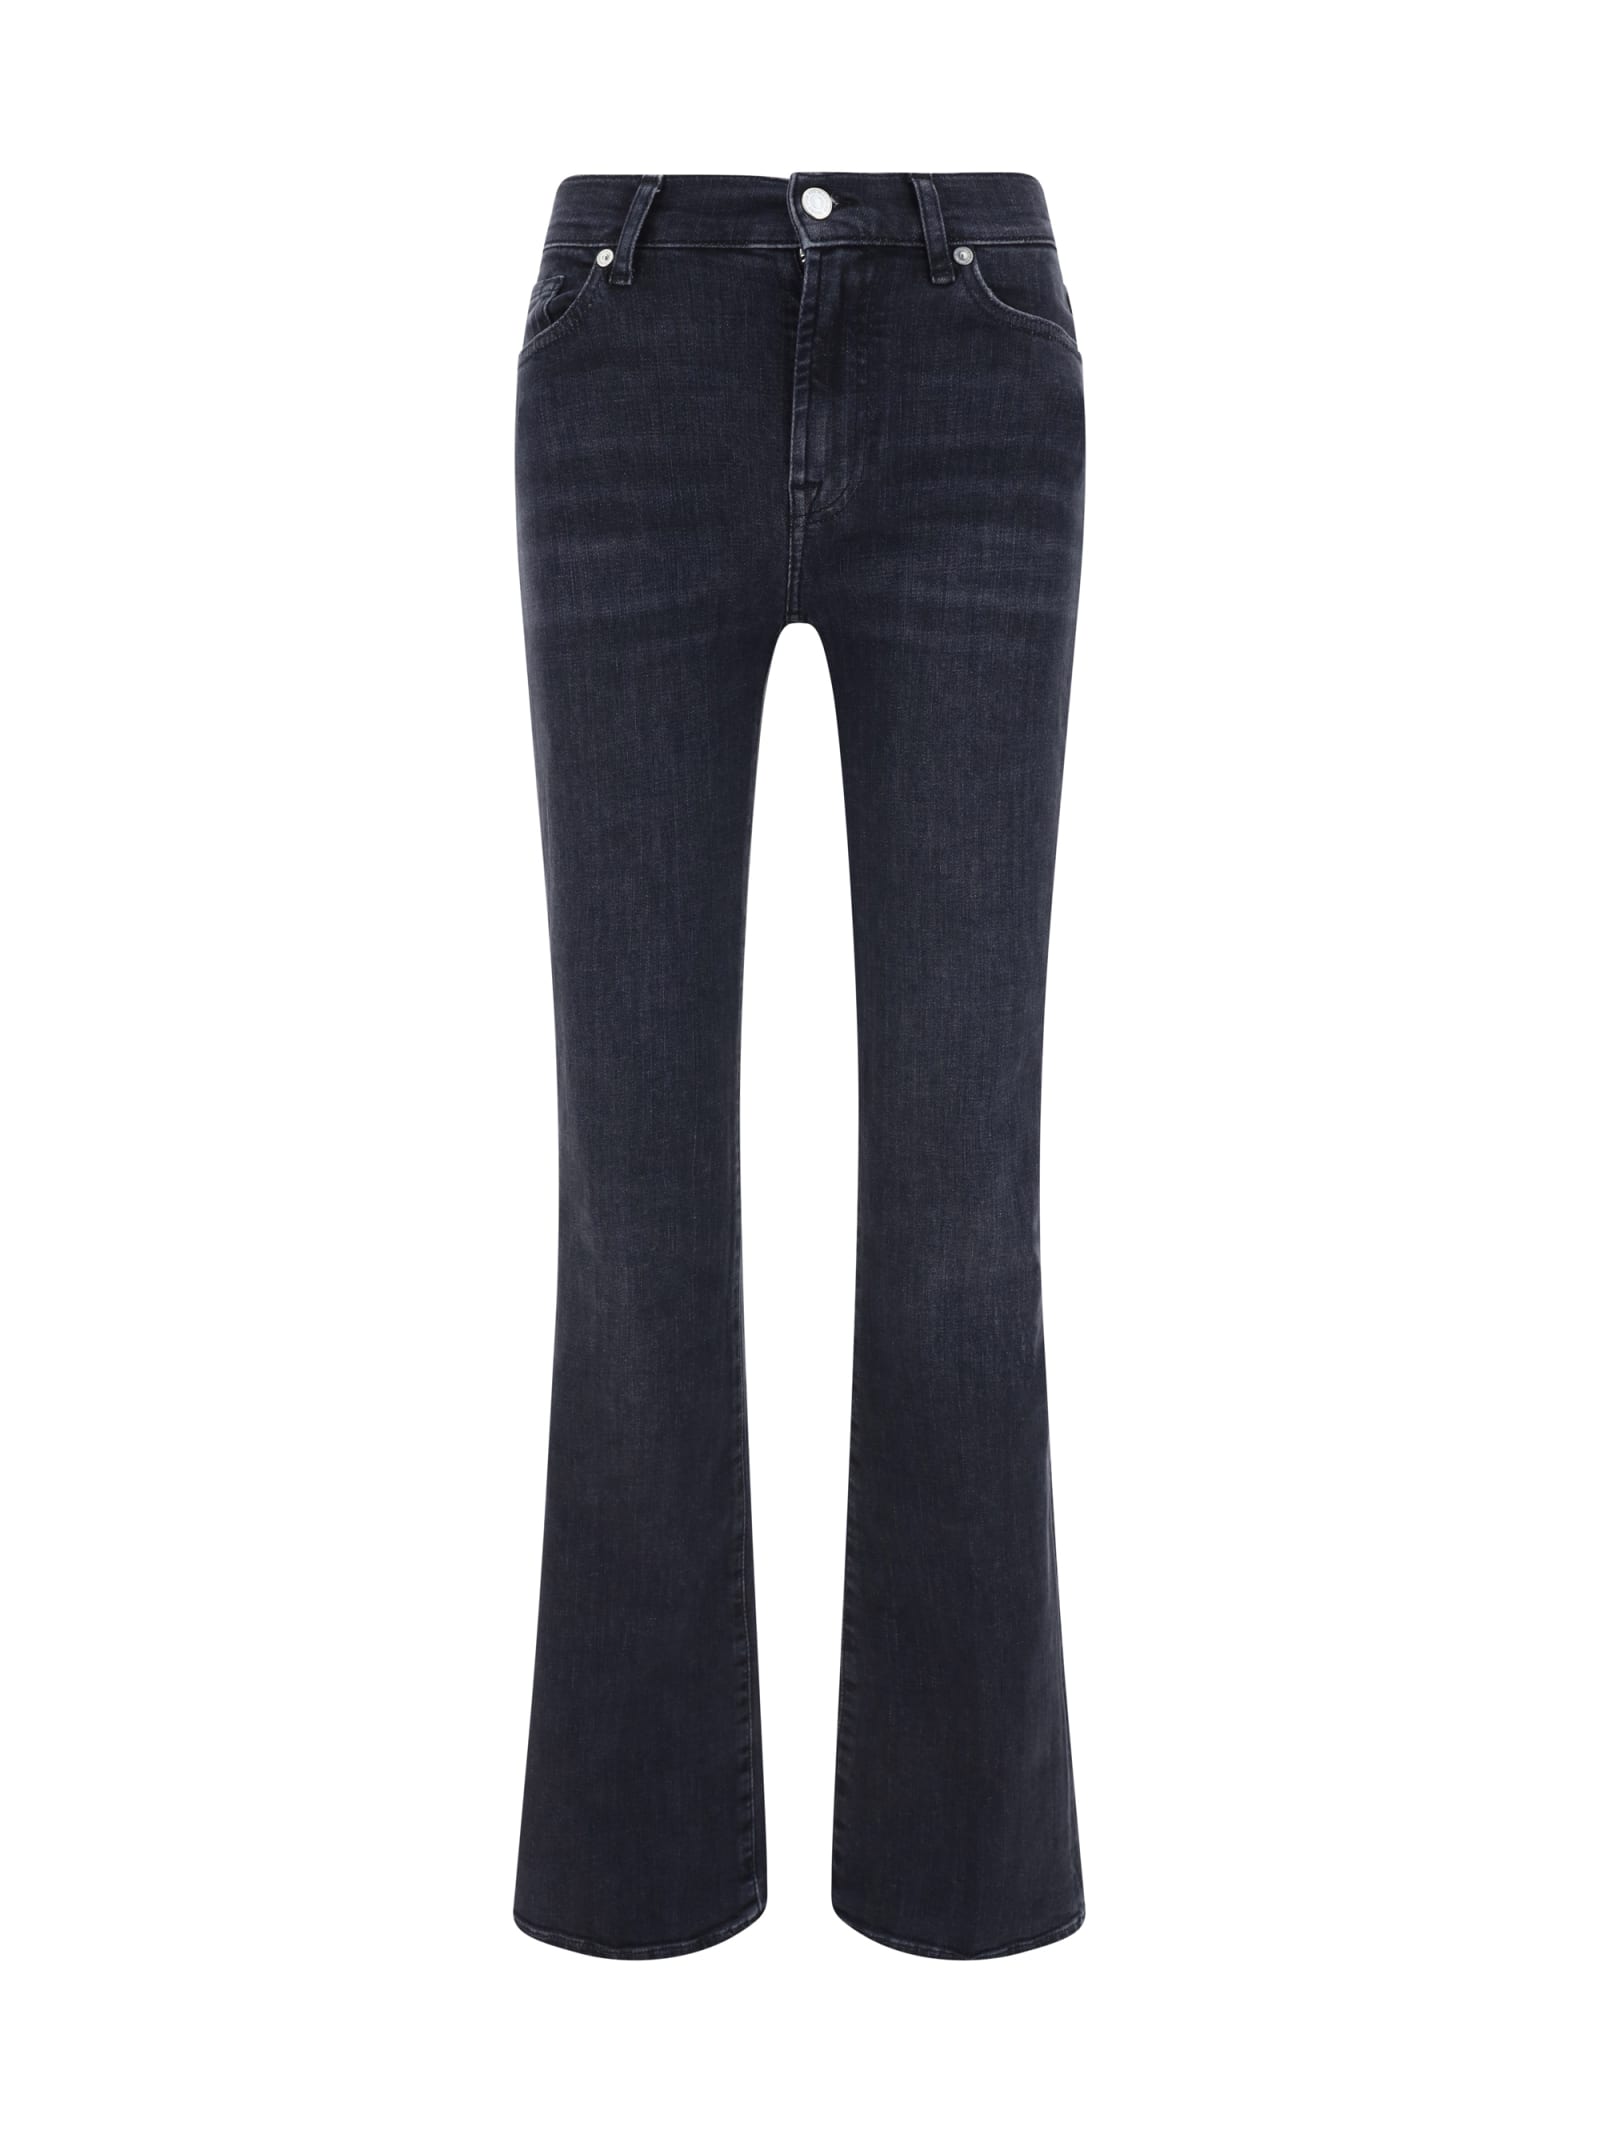 7 For All Mankind Illusion Space Jeans In Black